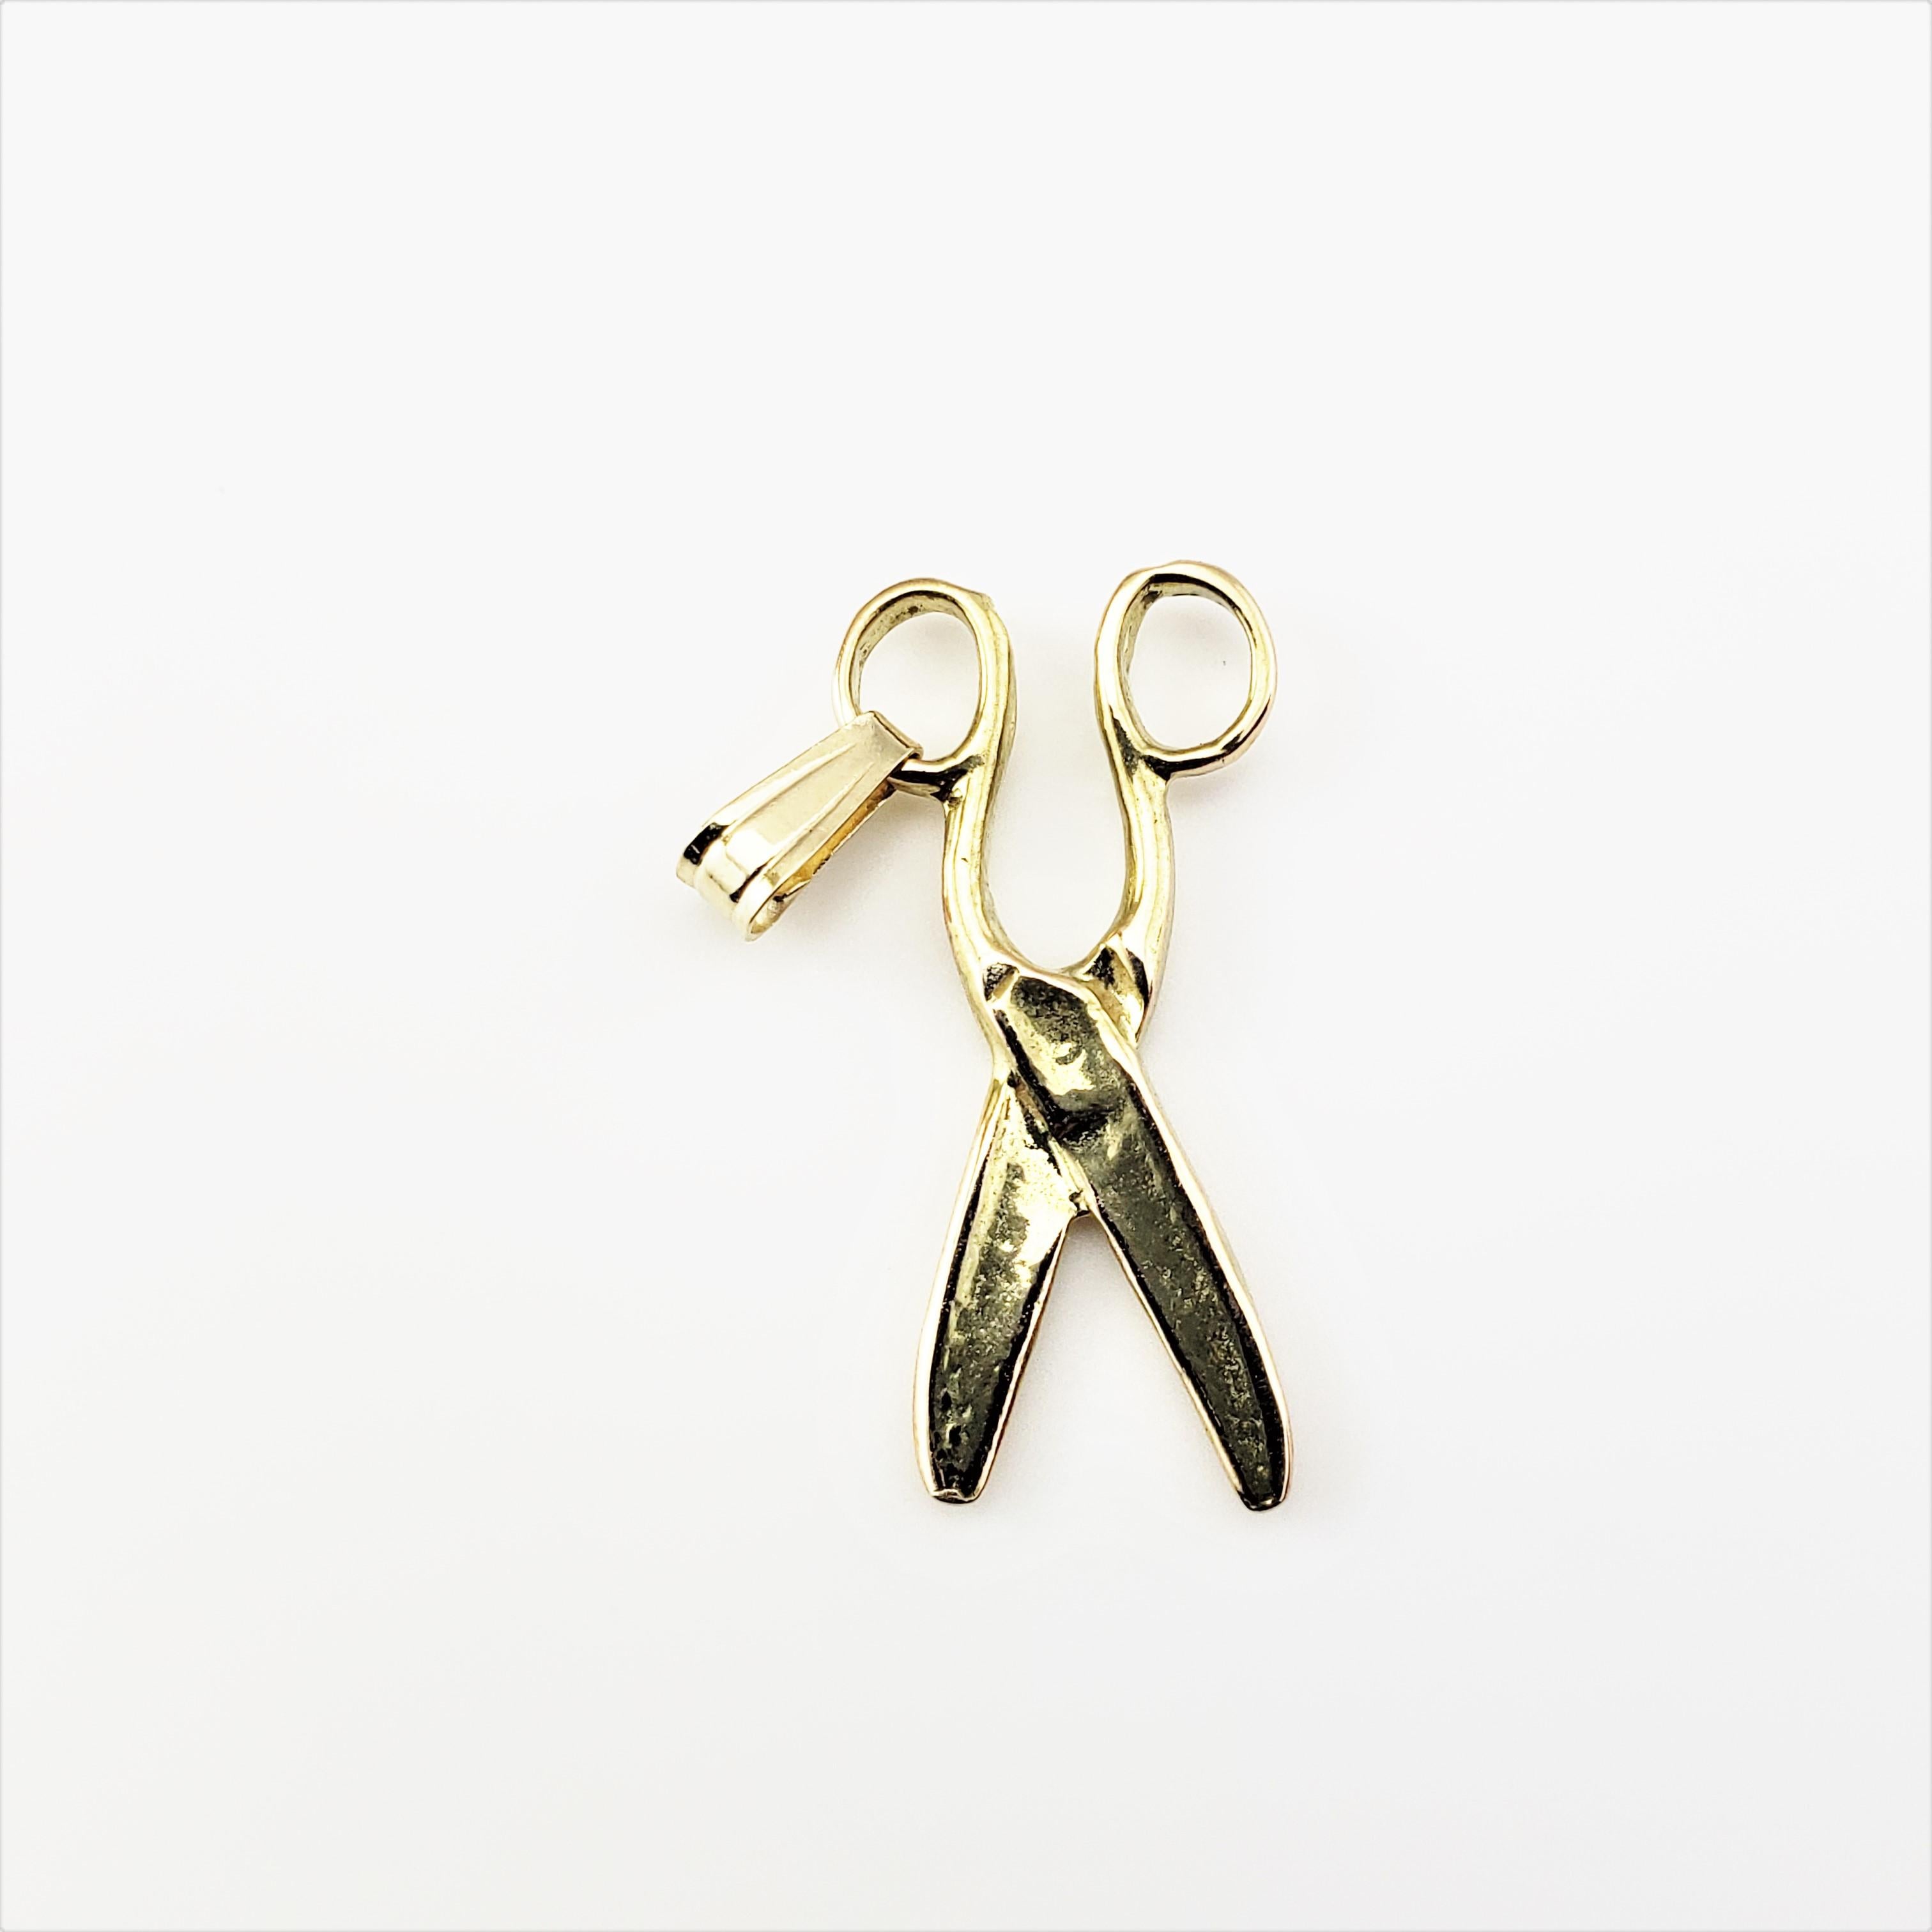 14 Karat Yellow Gold Scissors Charm-

This lovely charm features a miniature pair of scissors meticulously detailed in 14K yellow gold.

*Chain not included

Size: 21 mm x 8 mm (actual charm)

Weight:  0.6 dwt. /  1.0 gr.

Acid tested for 14K